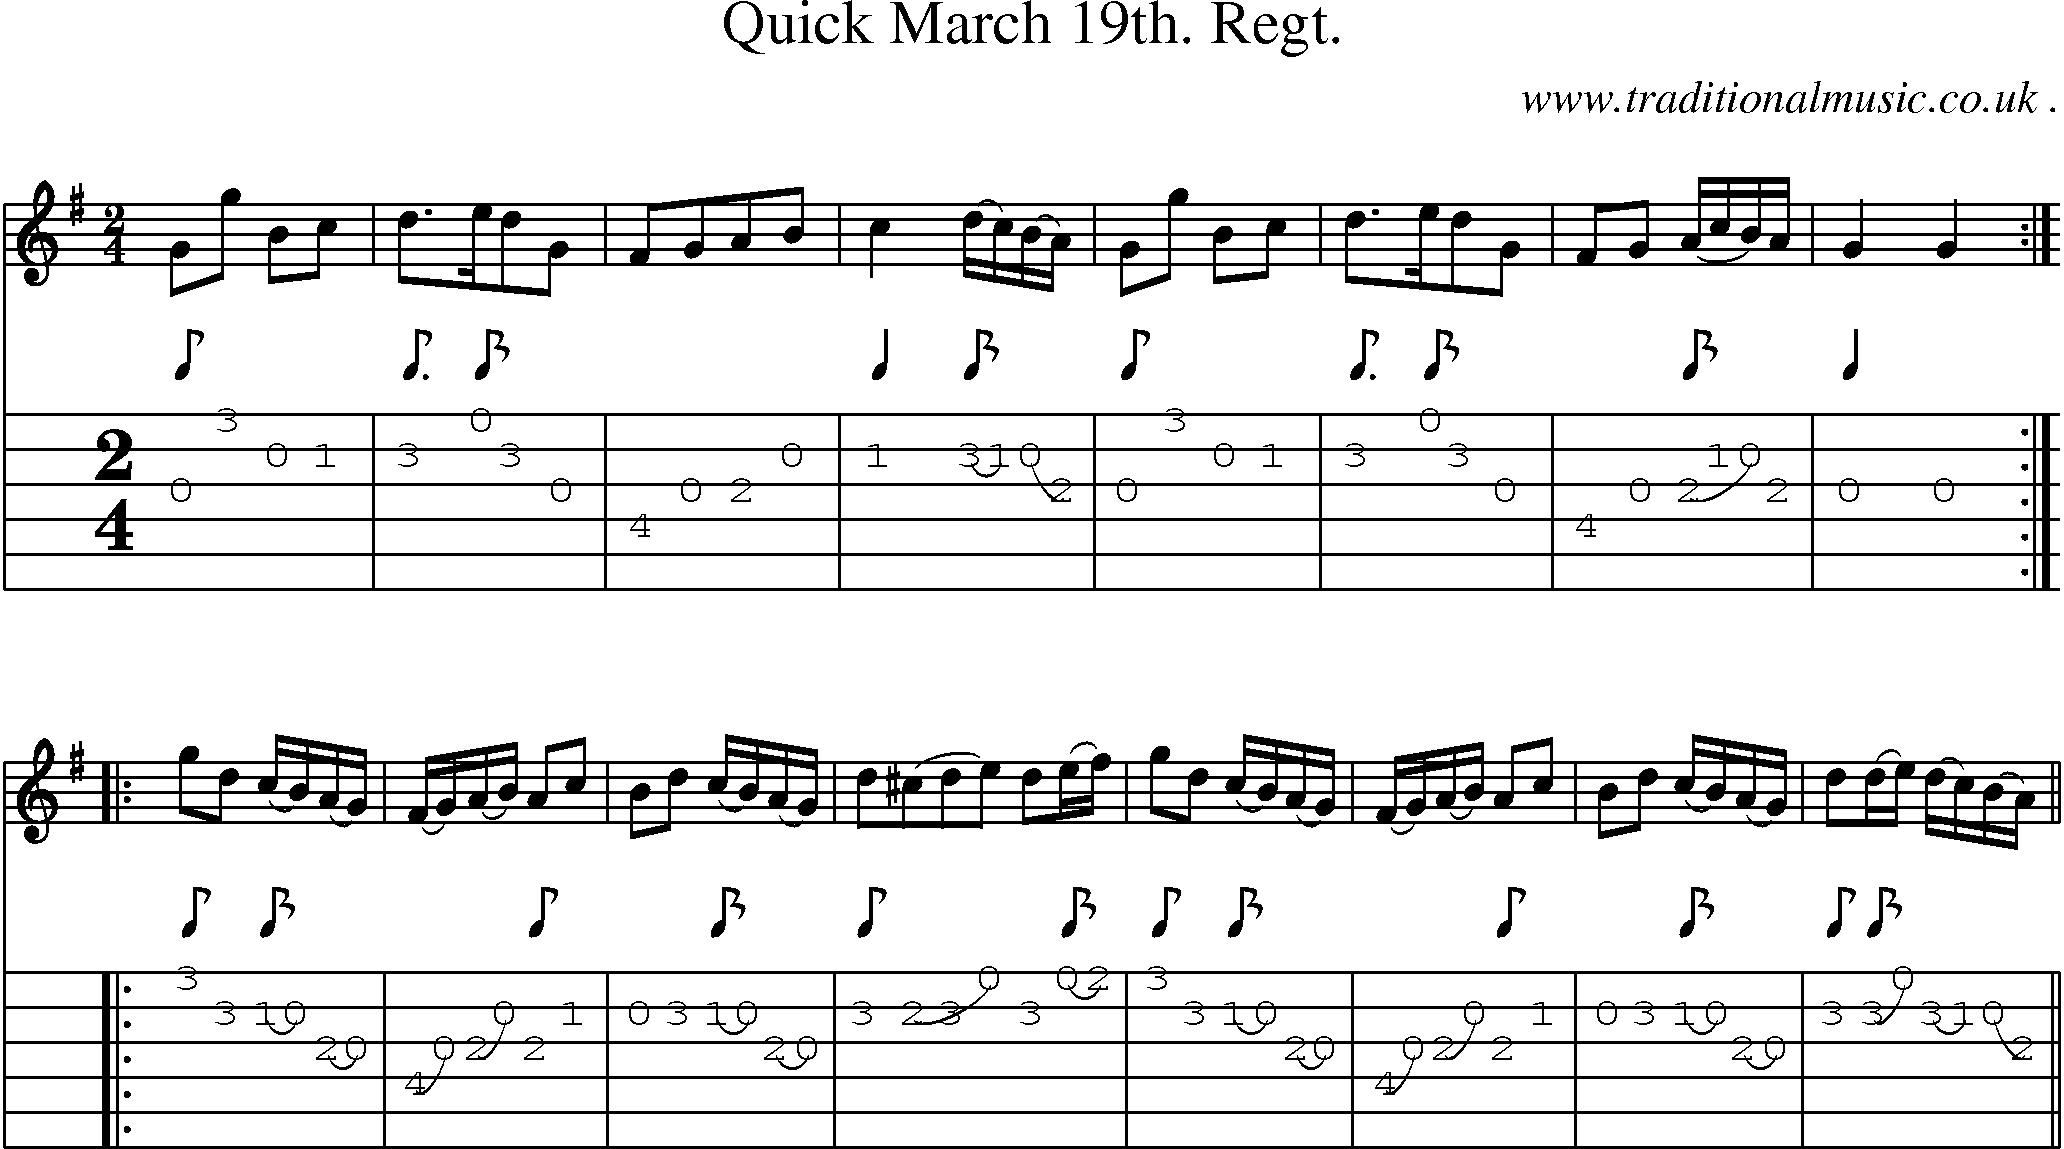 Sheet-Music and Guitar Tabs for Quick March 19th Regt